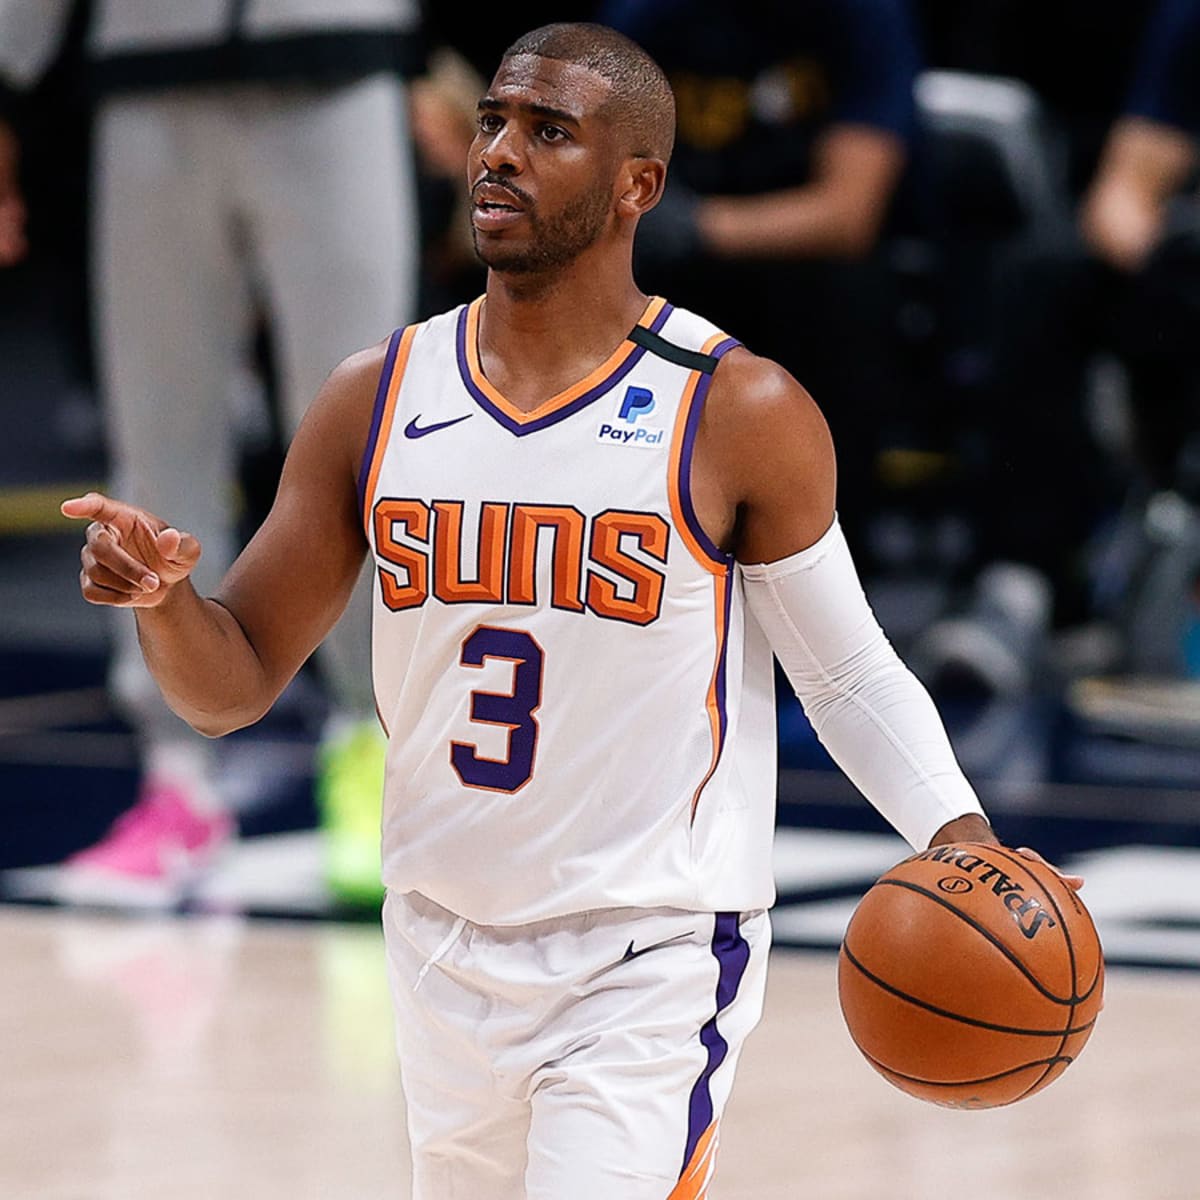 Chris Paul Claps Back At Charles Barkley And Shaquille O'Neal For Betting He Wouldn't Get 12 Assists: "I Can Get Chuck Some Buckets Now Even The Way He Looks."